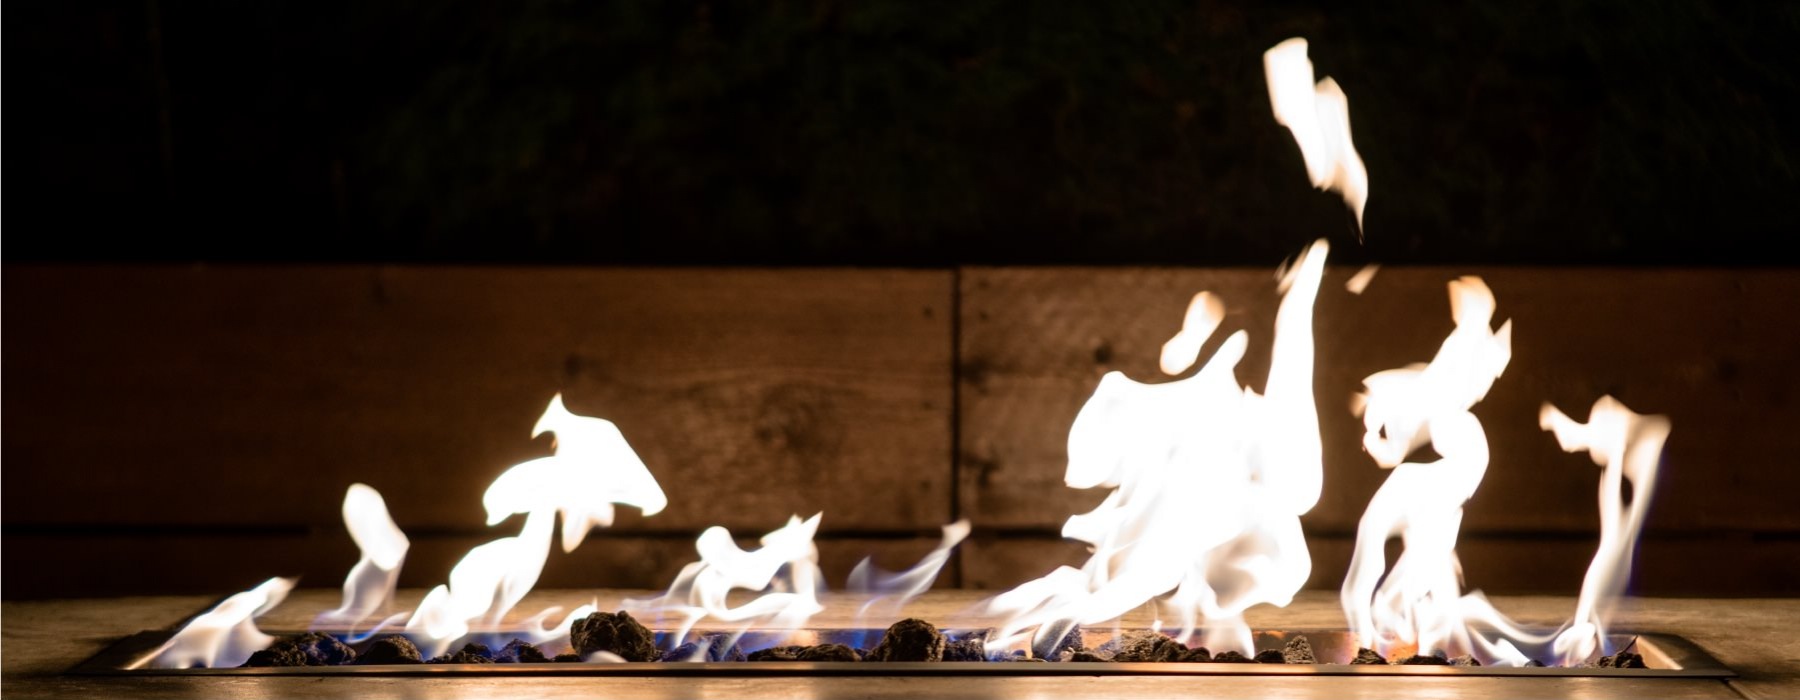 lifestyle image of flames in a fireplace